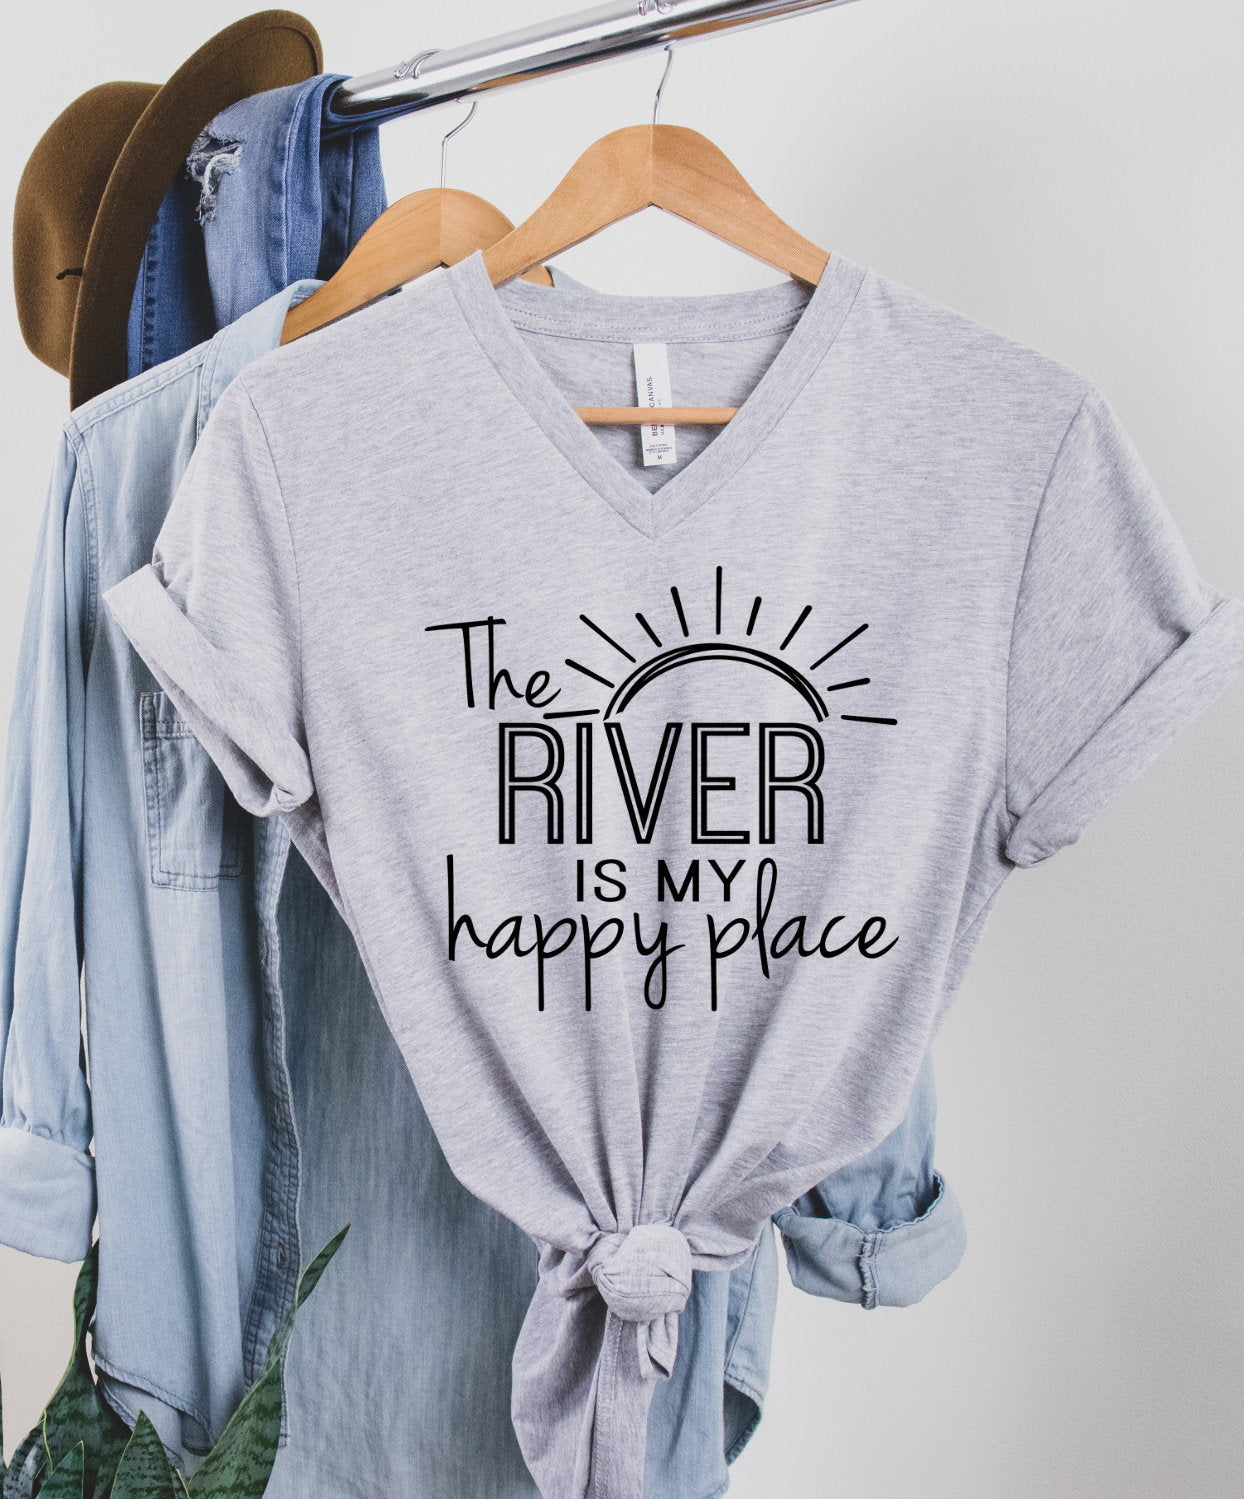 The River Is My Happy Place, Tubing, River Lover, Girls Weekend, Lake Is Happy Place Unisex V Neck Graphic Tee T-Shirt